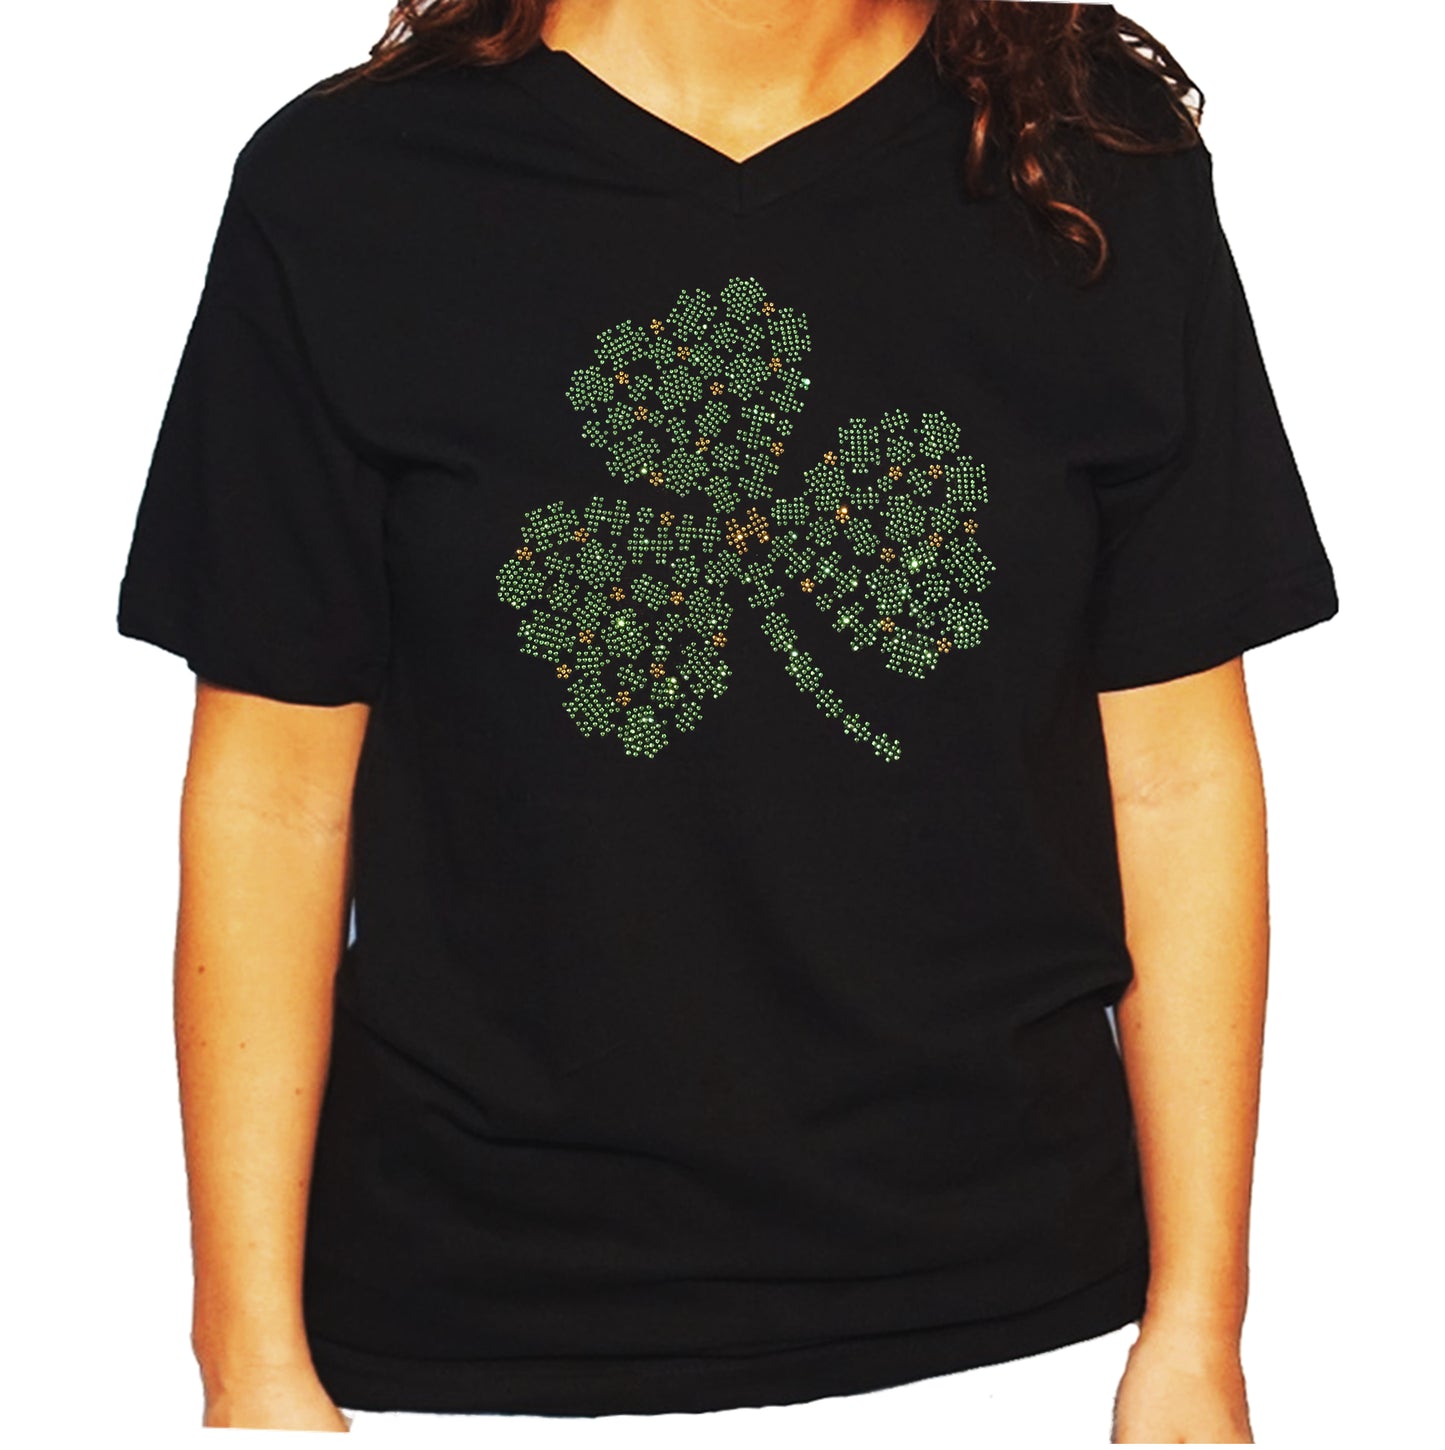 Women's / Unisex T-Shirt with St Patrick's Clover Collage in Rhinestones